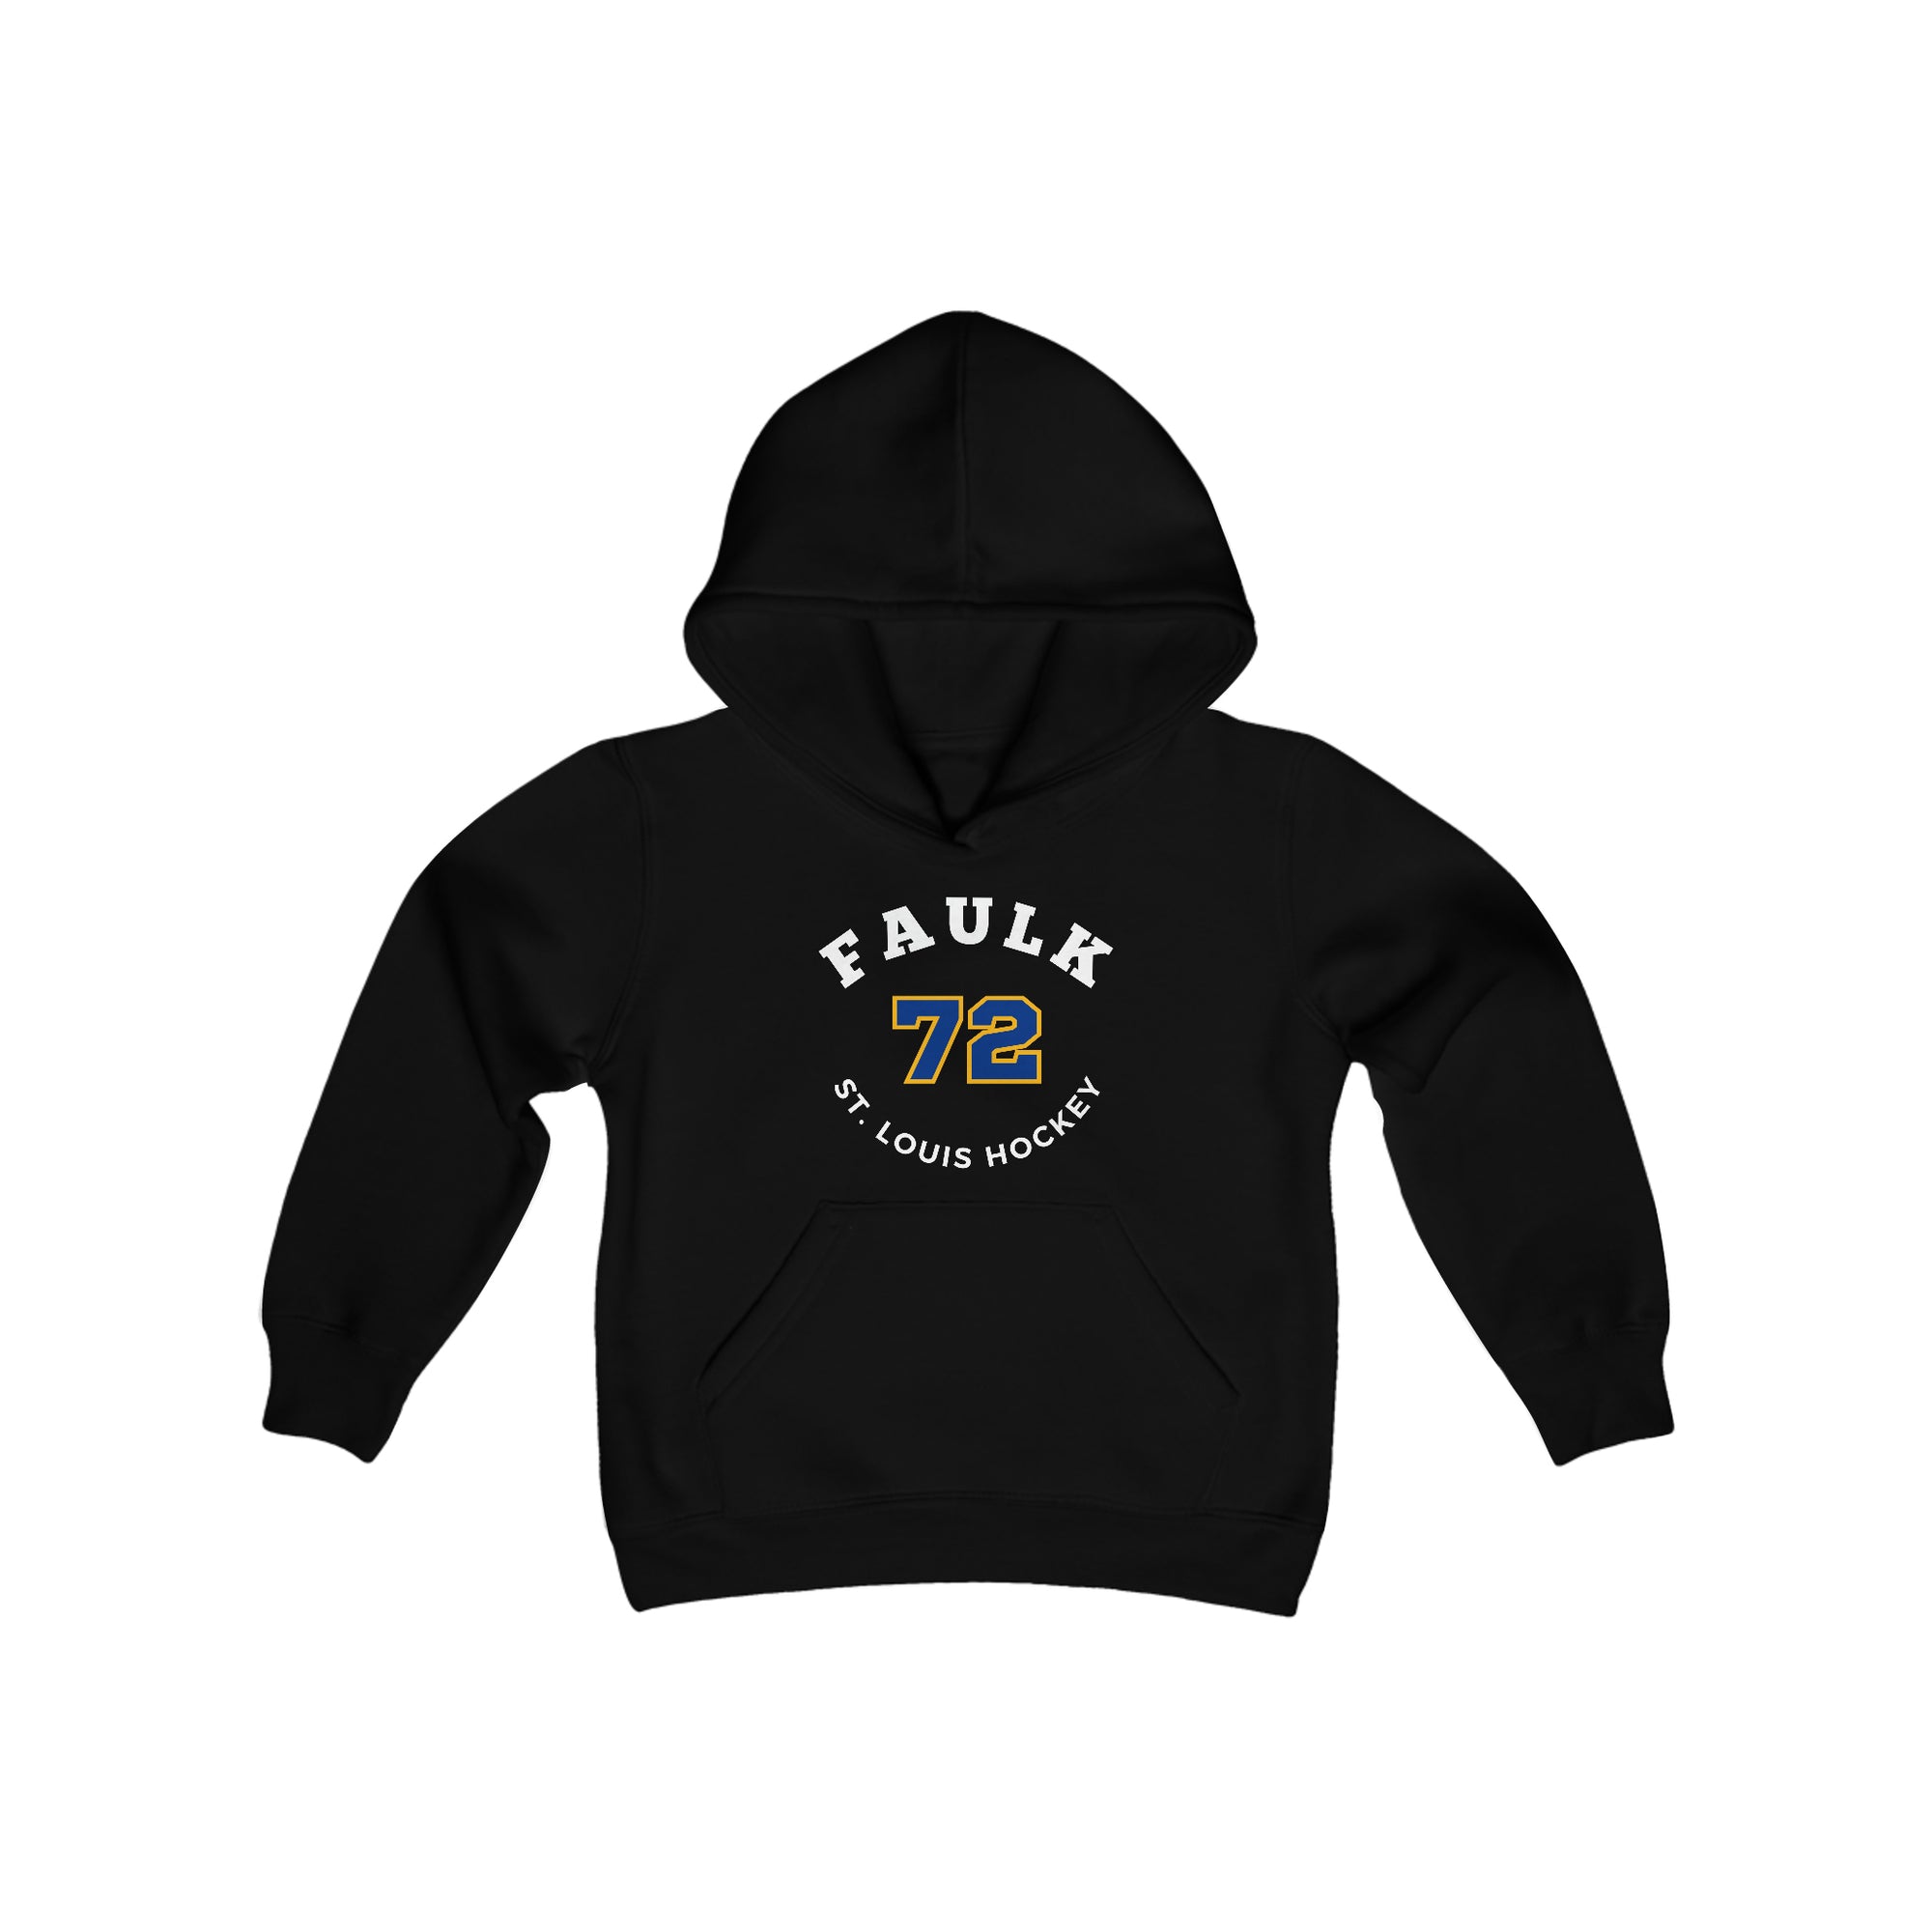 Faulk 72 St. Louis Hockey Number Arch Design Youth Hooded Sweatshirt